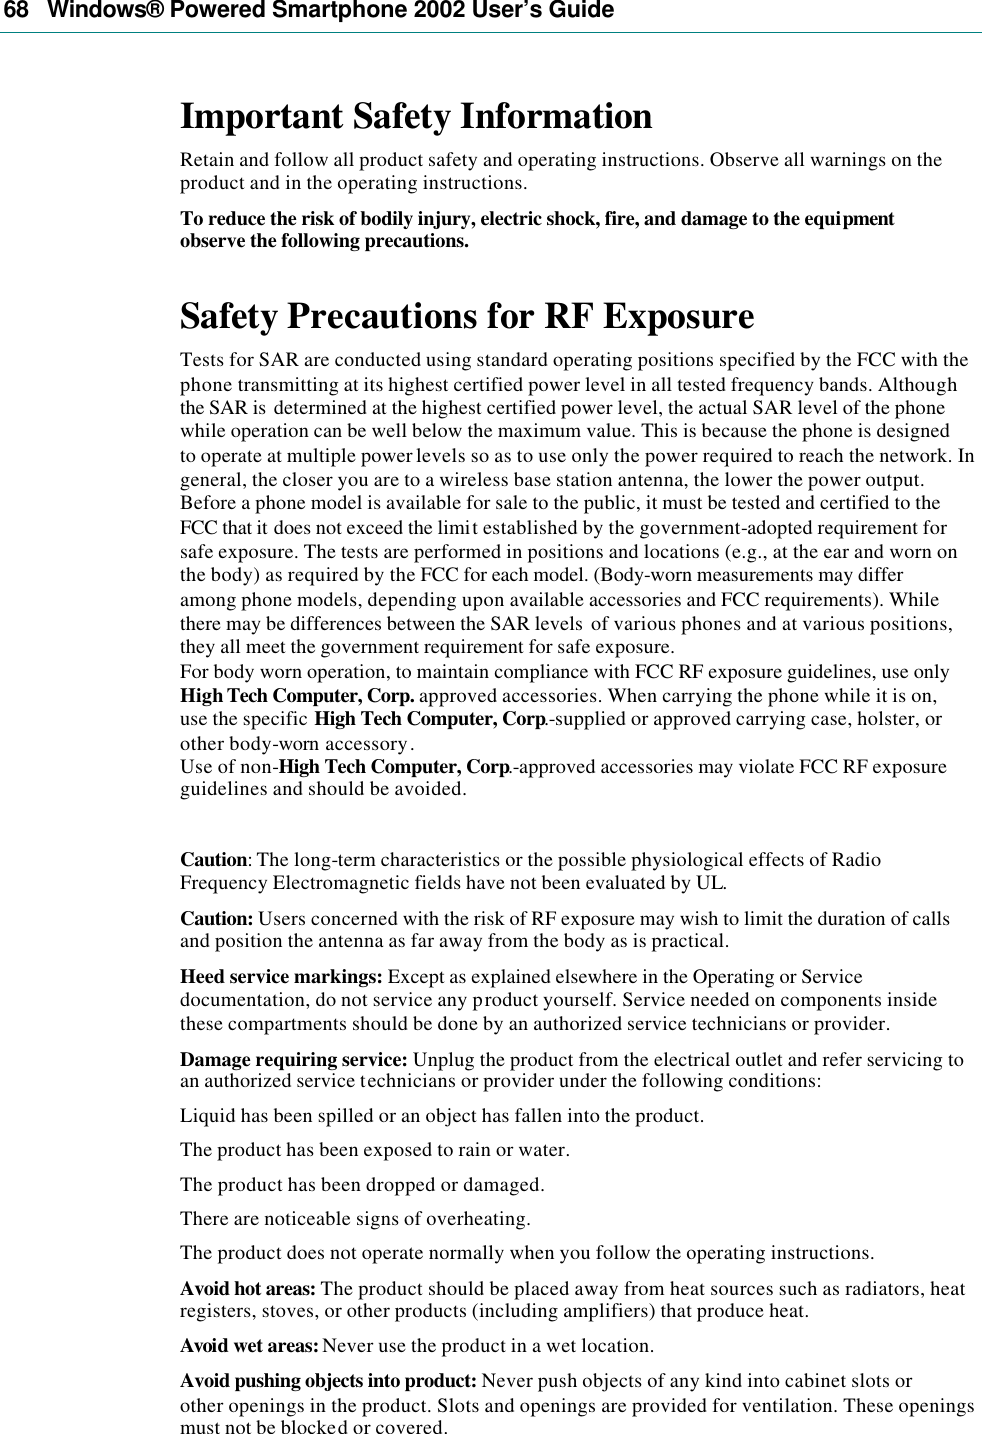 68   Windows® Powered Smartphone 2002 User’s Guide Important Safety Information Retain and follow all product safety and operating instructions. Observe all warnings on the product and in the operating instructions. To reduce the risk of bodily injury, electric shock, fire, and damage to the equipment observe the following precautions. Safety Precautions for RF Exposure Tests for SAR are conducted using standard operating positions specified by the FCC with the phone transmitting at its highest certified power level in all tested frequency bands. Although the SAR is  determined at the highest certified power level, the actual SAR level of the phone while operation can be well below the maximum value. This is because the phone is designed to operate at multiple power levels so as to use only the power required to reach the network. In general, the closer you are to a wireless base station antenna, the lower the power output. Before a phone model is available for sale to the public, it must be tested and certified to the FCC that it does not exceed the limit established by the government-adopted requirement for safe exposure. The tests are performed in positions and locations (e.g., at the ear and worn on the body) as required by the FCC for each model. (Body-worn measurements may differ among phone models, depending upon available accessories and FCC requirements). While there may be differences between the SAR levels  of various phones and at various positions, they all meet the government requirement for safe exposure. For body worn operation, to maintain compliance with FCC RF exposure guidelines, use only High Tech Computer, Corp. approved accessories. When carrying the phone while it is on, use the specific High Tech Computer, Corp.-supplied or approved carrying case, holster, or other body-worn accessory. Use of non-High Tech Computer, Corp.-approved accessories may violate FCC RF exposure guidelines and should be avoided.  Caution: The long-term characteristics or the possible physiological effects of Radio Frequency Electromagnetic fields have not been evaluated by UL. Caution: Users concerned with the risk of RF exposure may wish to limit the duration of calls and position the antenna as far away from the body as is practical. Heed service markings: Except as explained elsewhere in the Operating or Service documentation, do not service any product yourself. Service needed on components inside these compartments should be done by an authorized service technicians or provider. Damage requiring service: Unplug the product from the electrical outlet and refer servicing to an authorized service technicians or provider under the following conditions: Liquid has been spilled or an object has fallen into the product. The product has been exposed to rain or water. The product has been dropped or damaged. There are noticeable signs of overheating. The product does not operate normally when you follow the operating instructions. Avoid hot areas: The product should be placed away from heat sources such as radiators, heat registers, stoves, or other products (including amplifiers) that produce heat. Avoid wet areas: Never use the product in a wet location. Avoid pushing objects into product: Never push objects of any kind into cabinet slots or other openings in the product. Slots and openings are provided for ventilation. These openings must not be blocked or covered. 